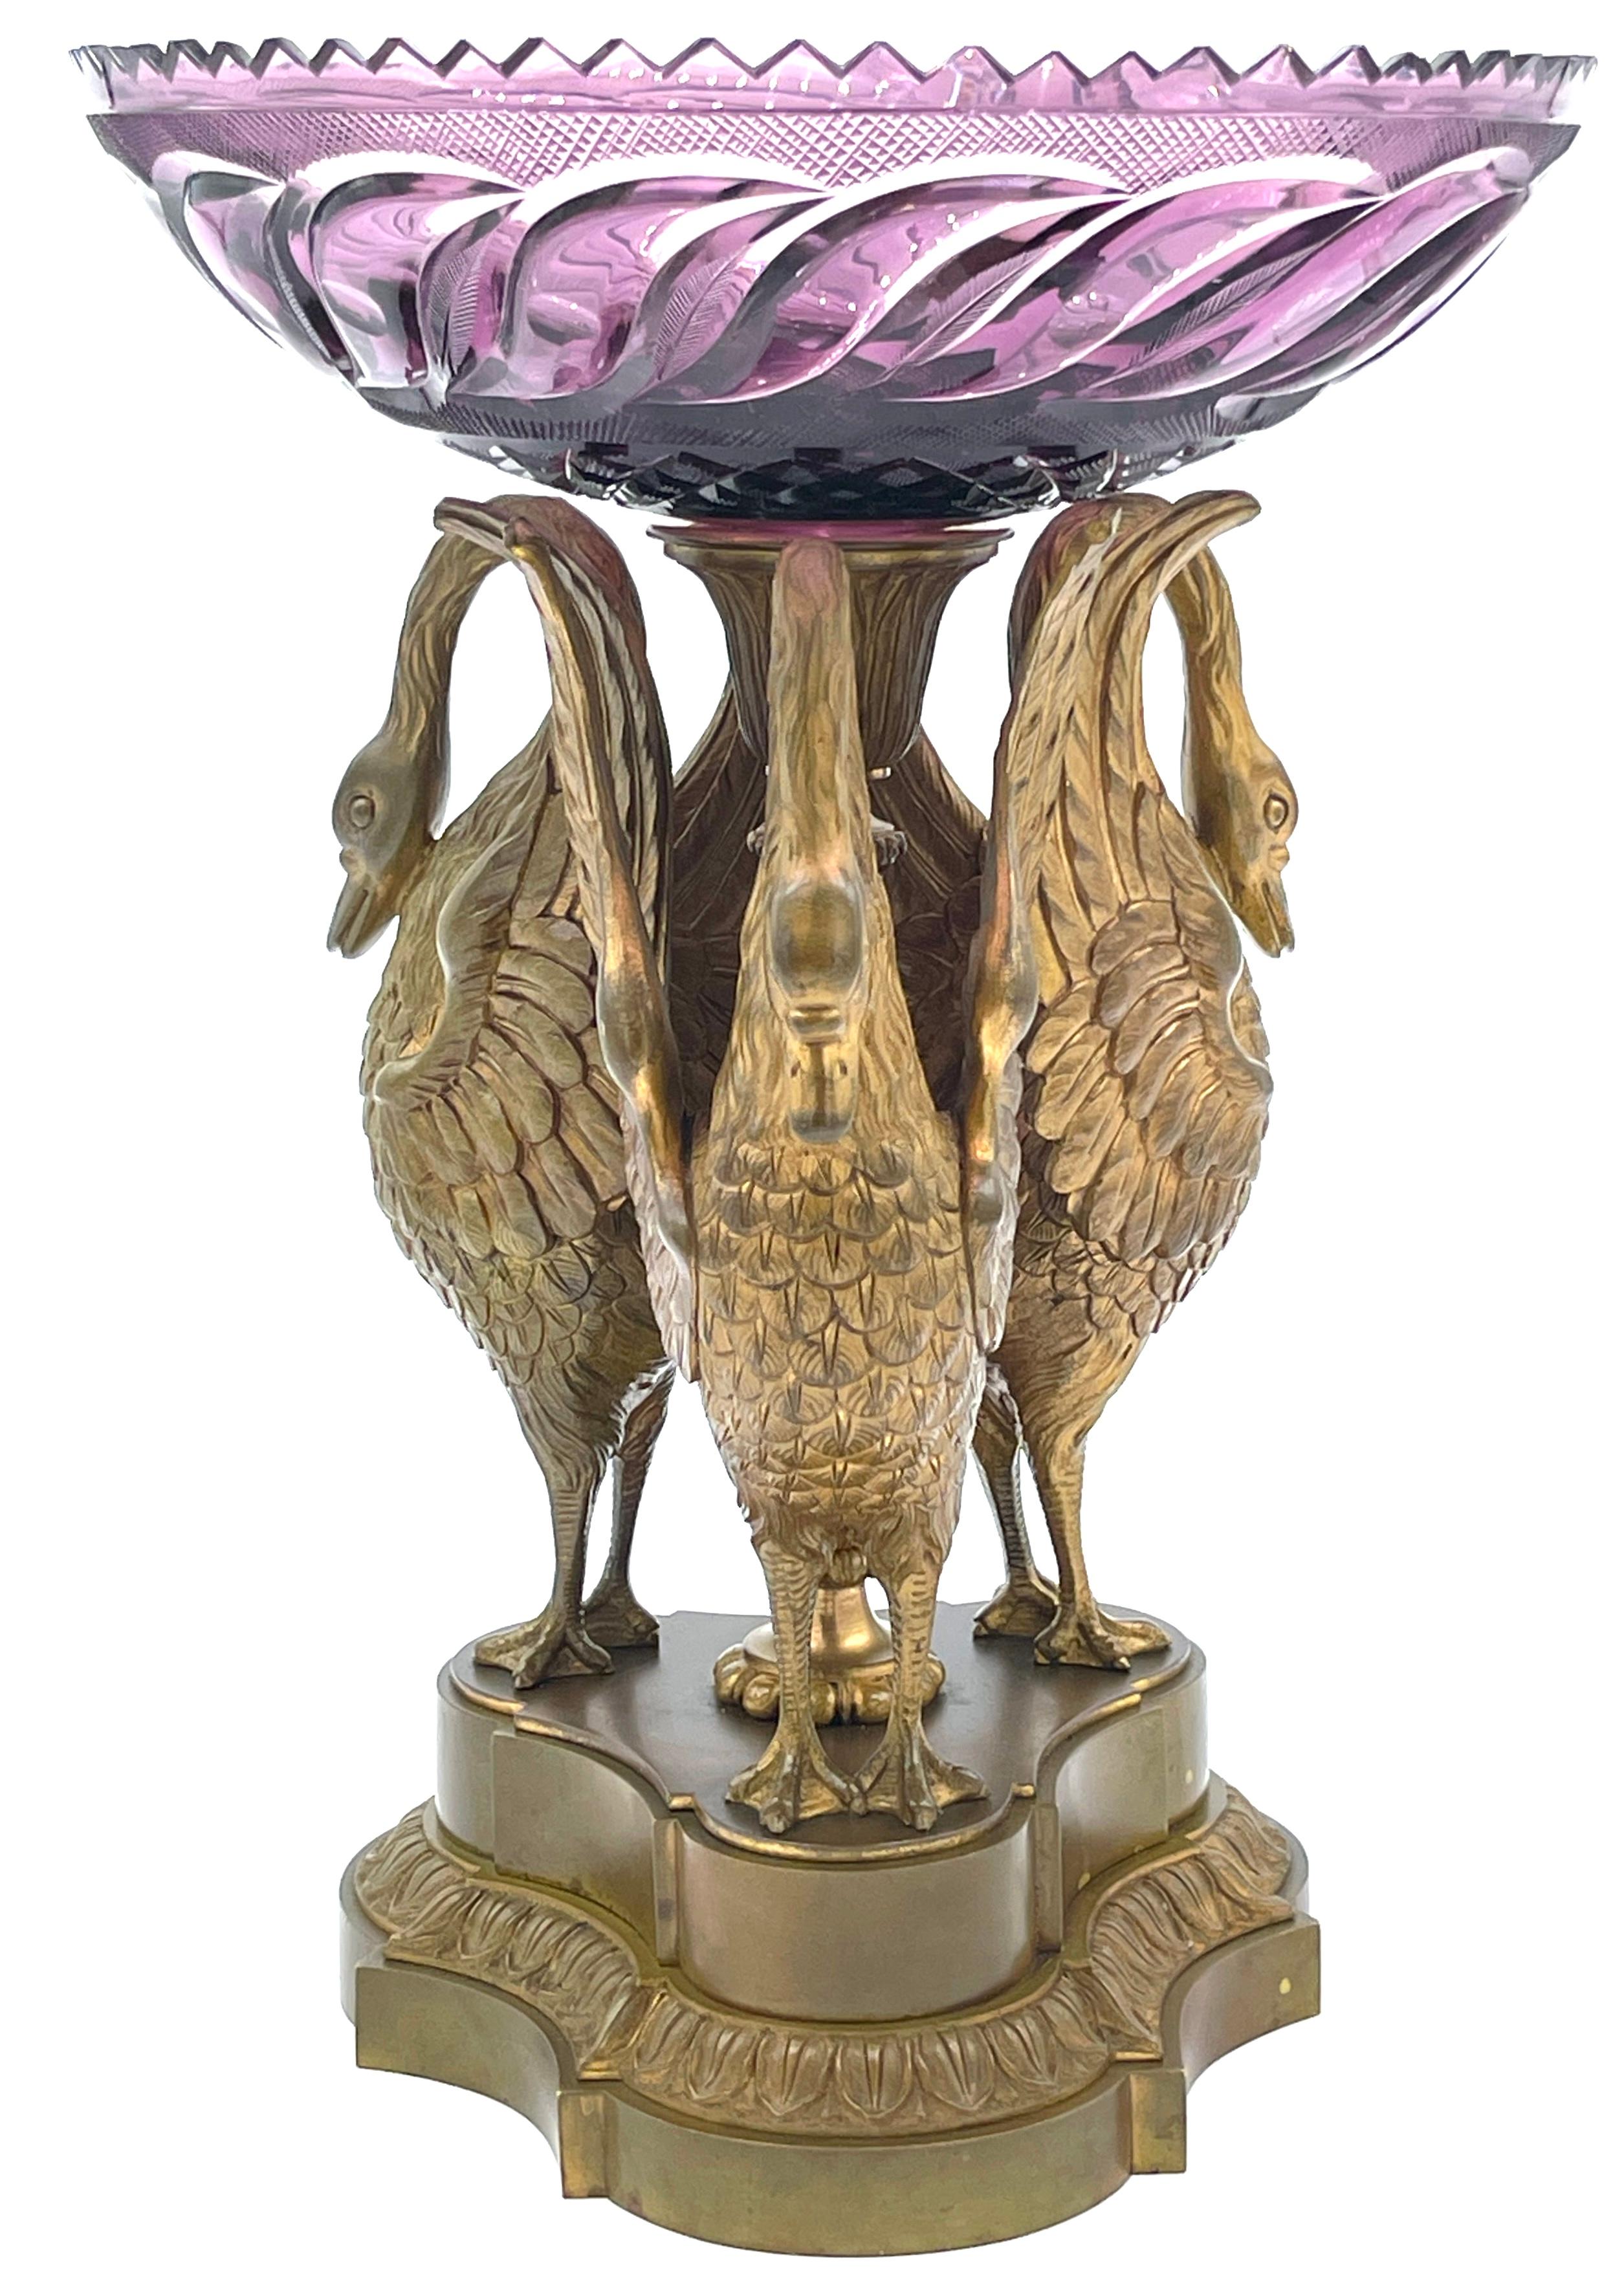 Russian Ormolu and Amethyst Glass Swan Centerpiece, Attributed to Imperial Russian Glass Works
St. Petersburg Imperial Glass Factory, Mid to late 19th Century 

A stunning example of  Imperial Russian craftsmanship with this beautiful  ormolu and